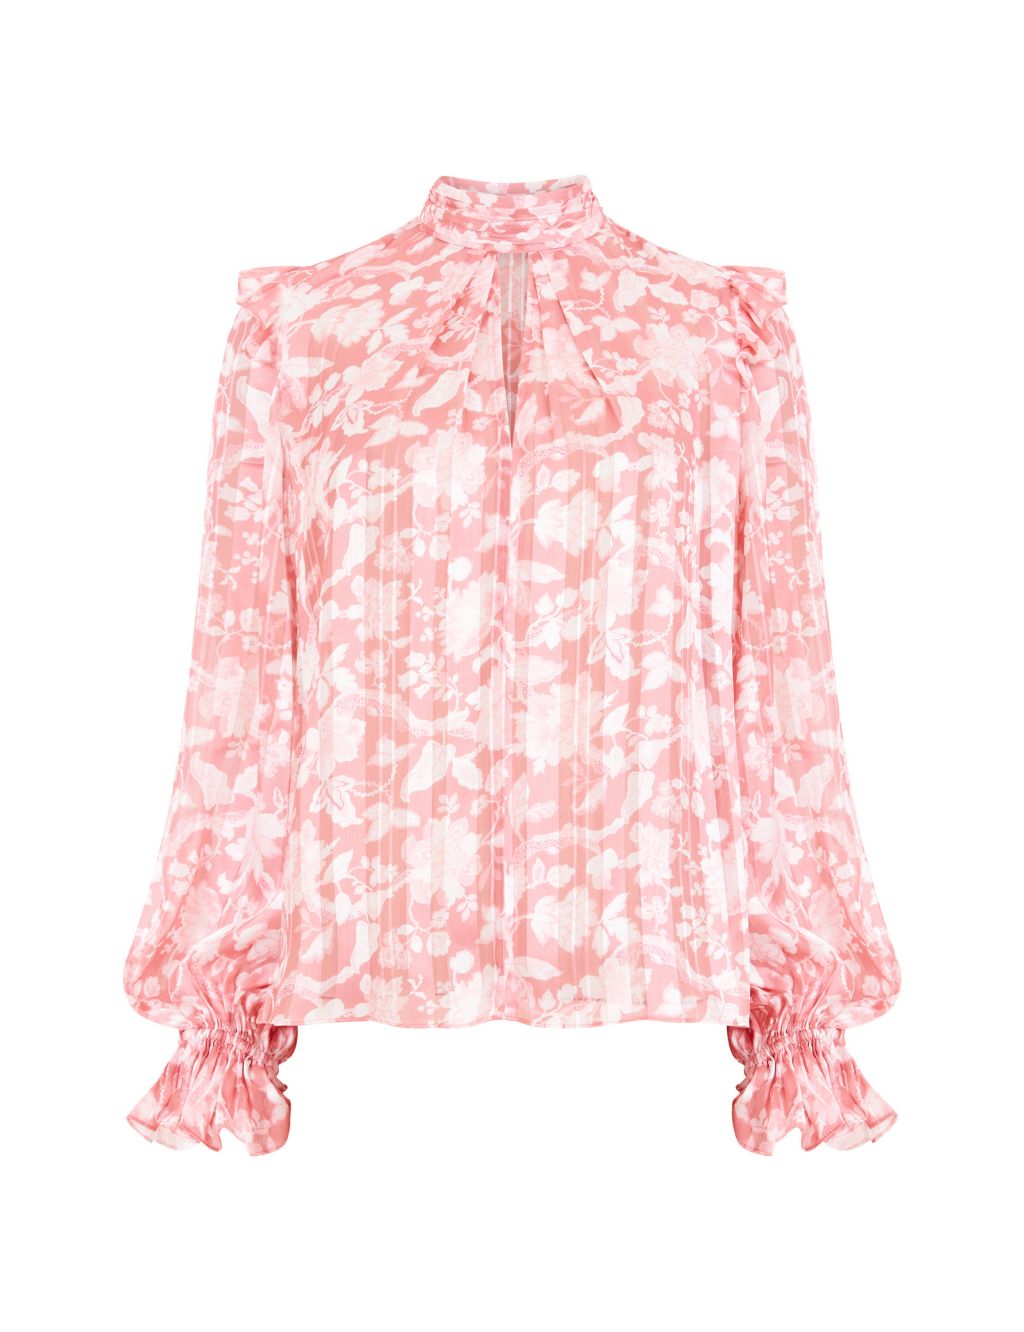 Floral High Neck Frill Detail Blouse | French Connection | M&S